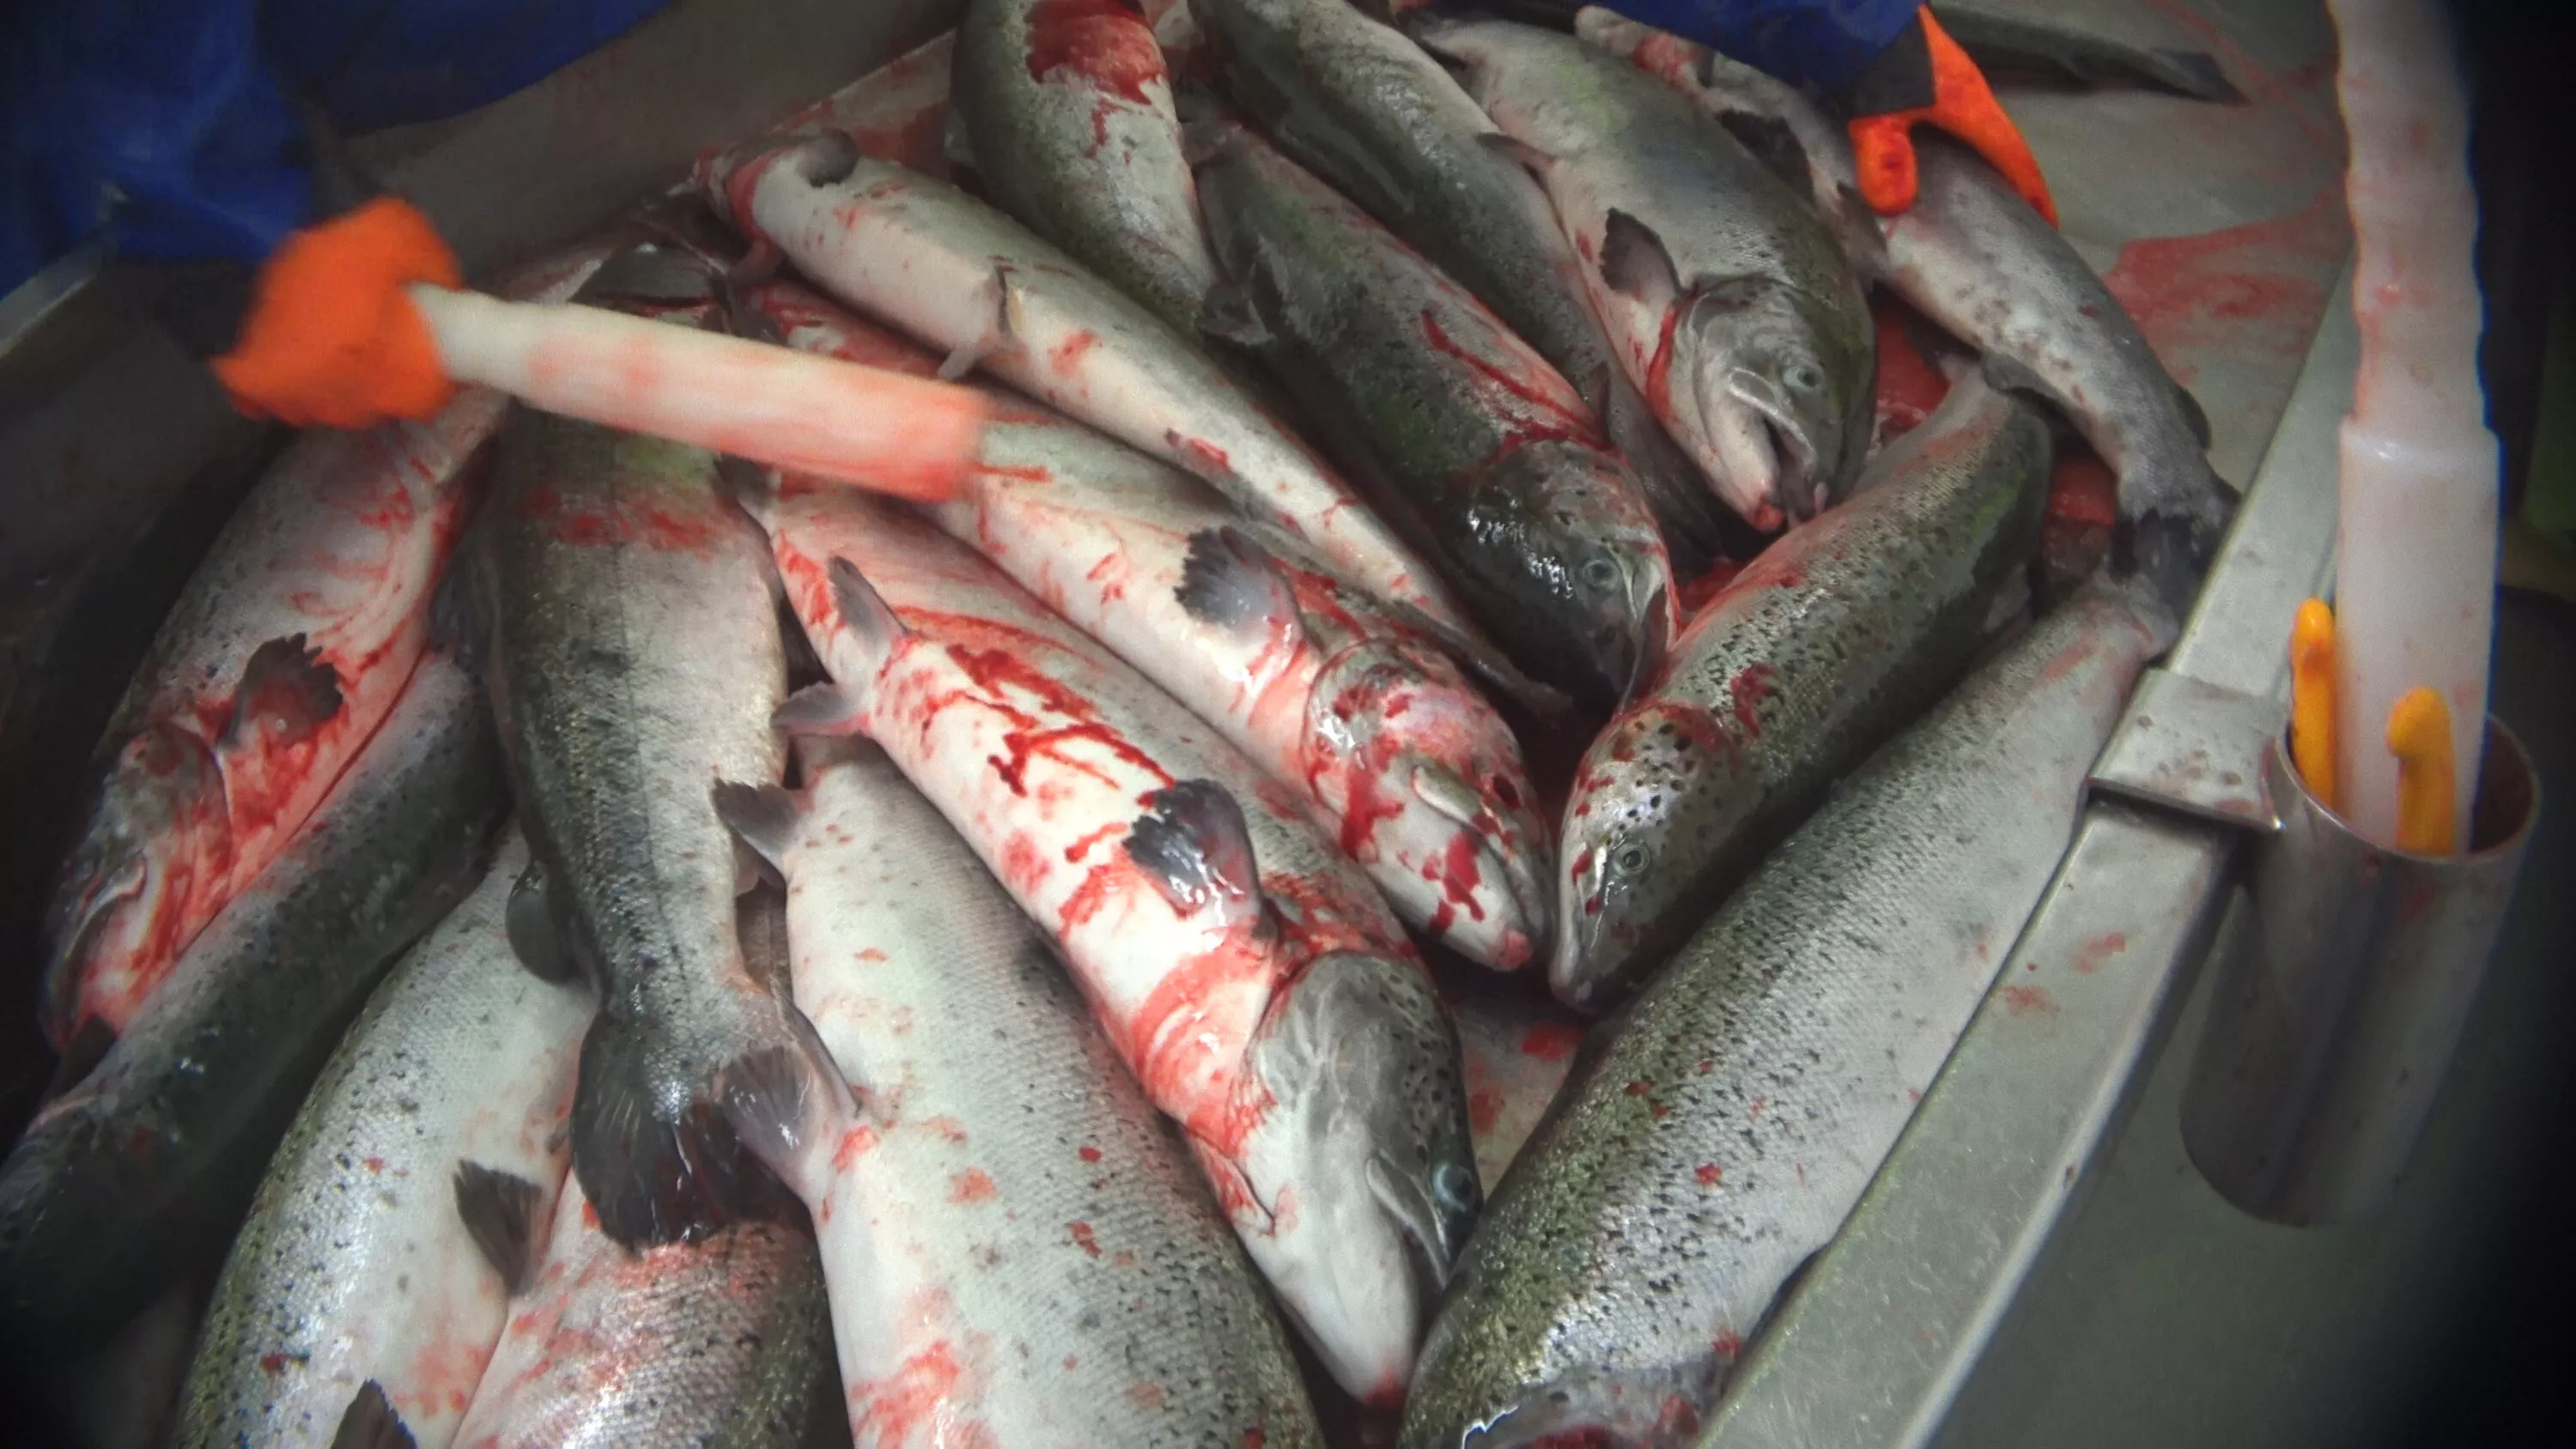 Farmed salmon are bludgeoned at a slaughterhouse